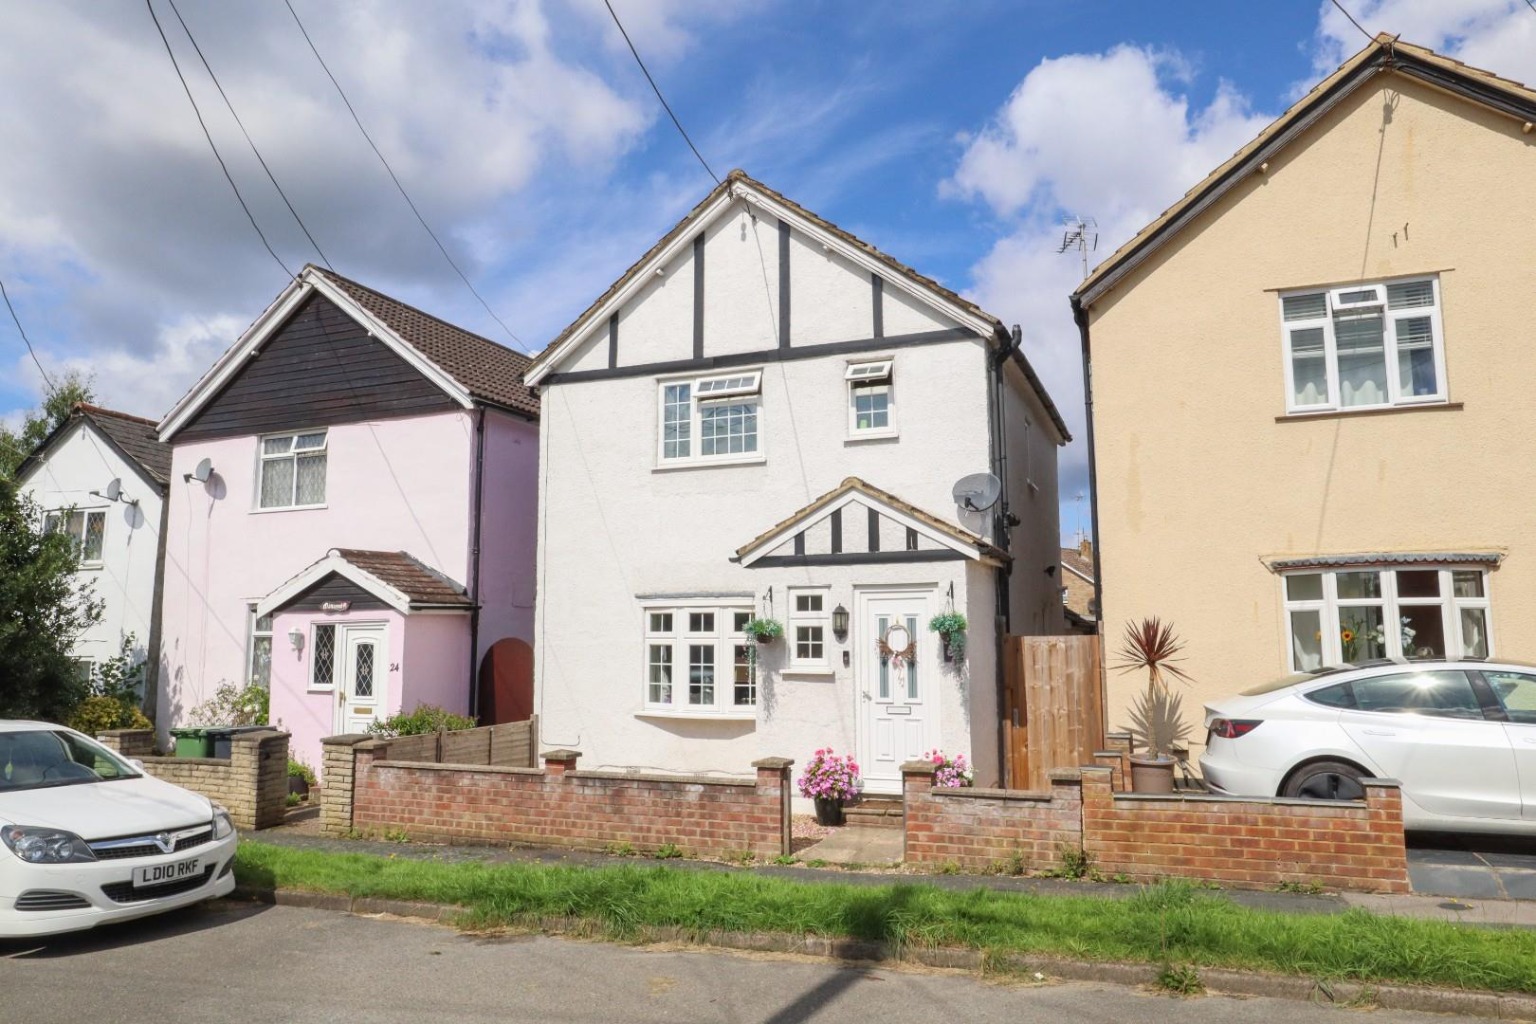 3 bed detached house for sale in Bedford Lane, Camberley, GU16